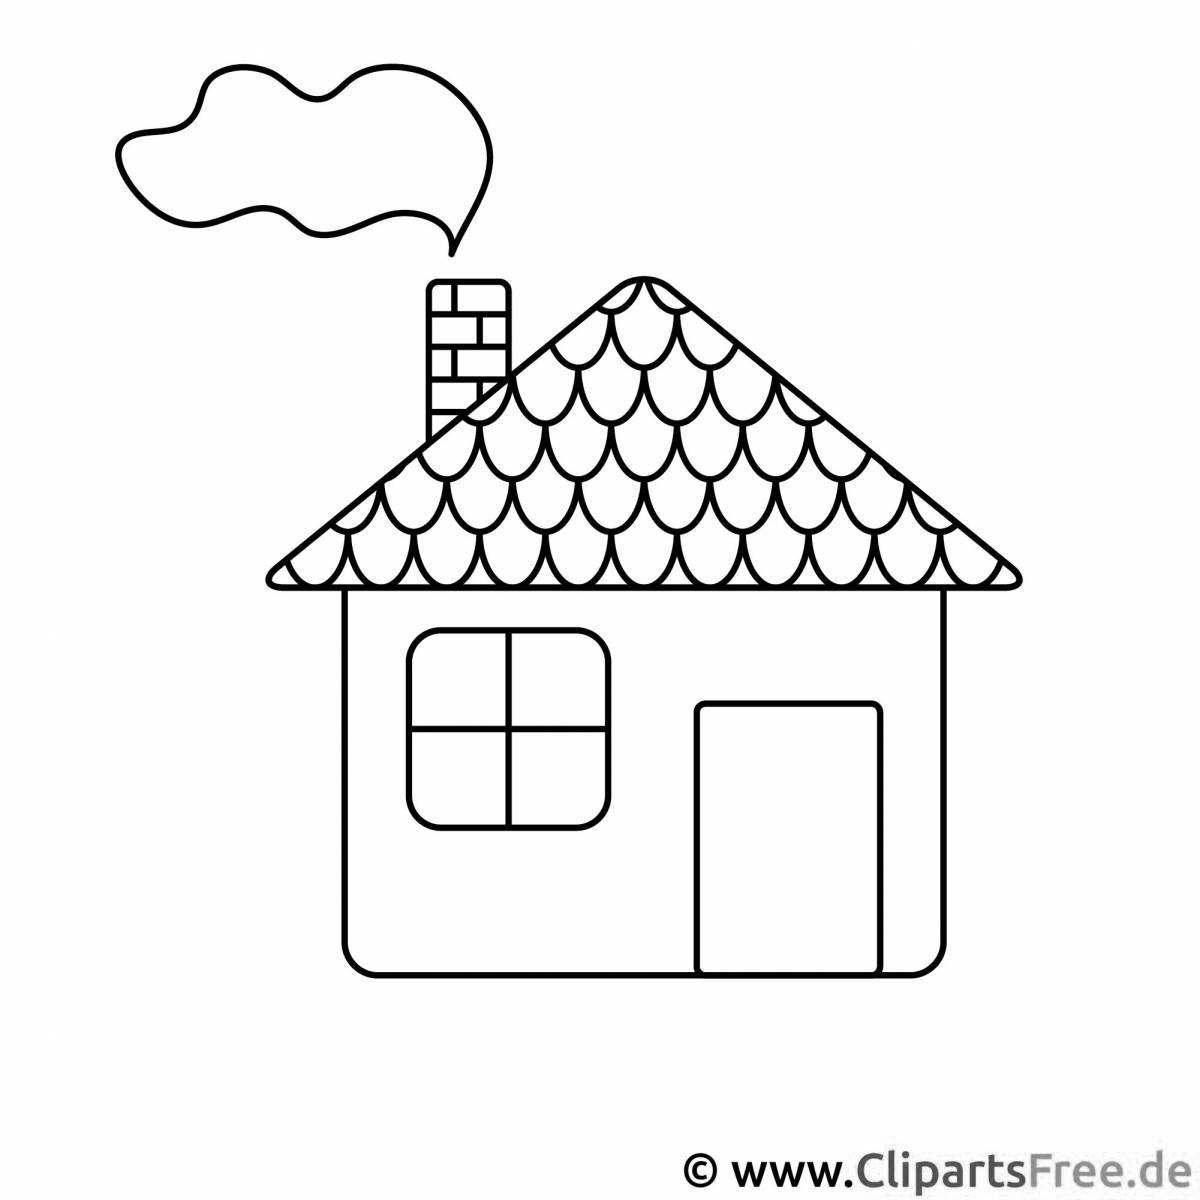 Colorful simple house coloring page